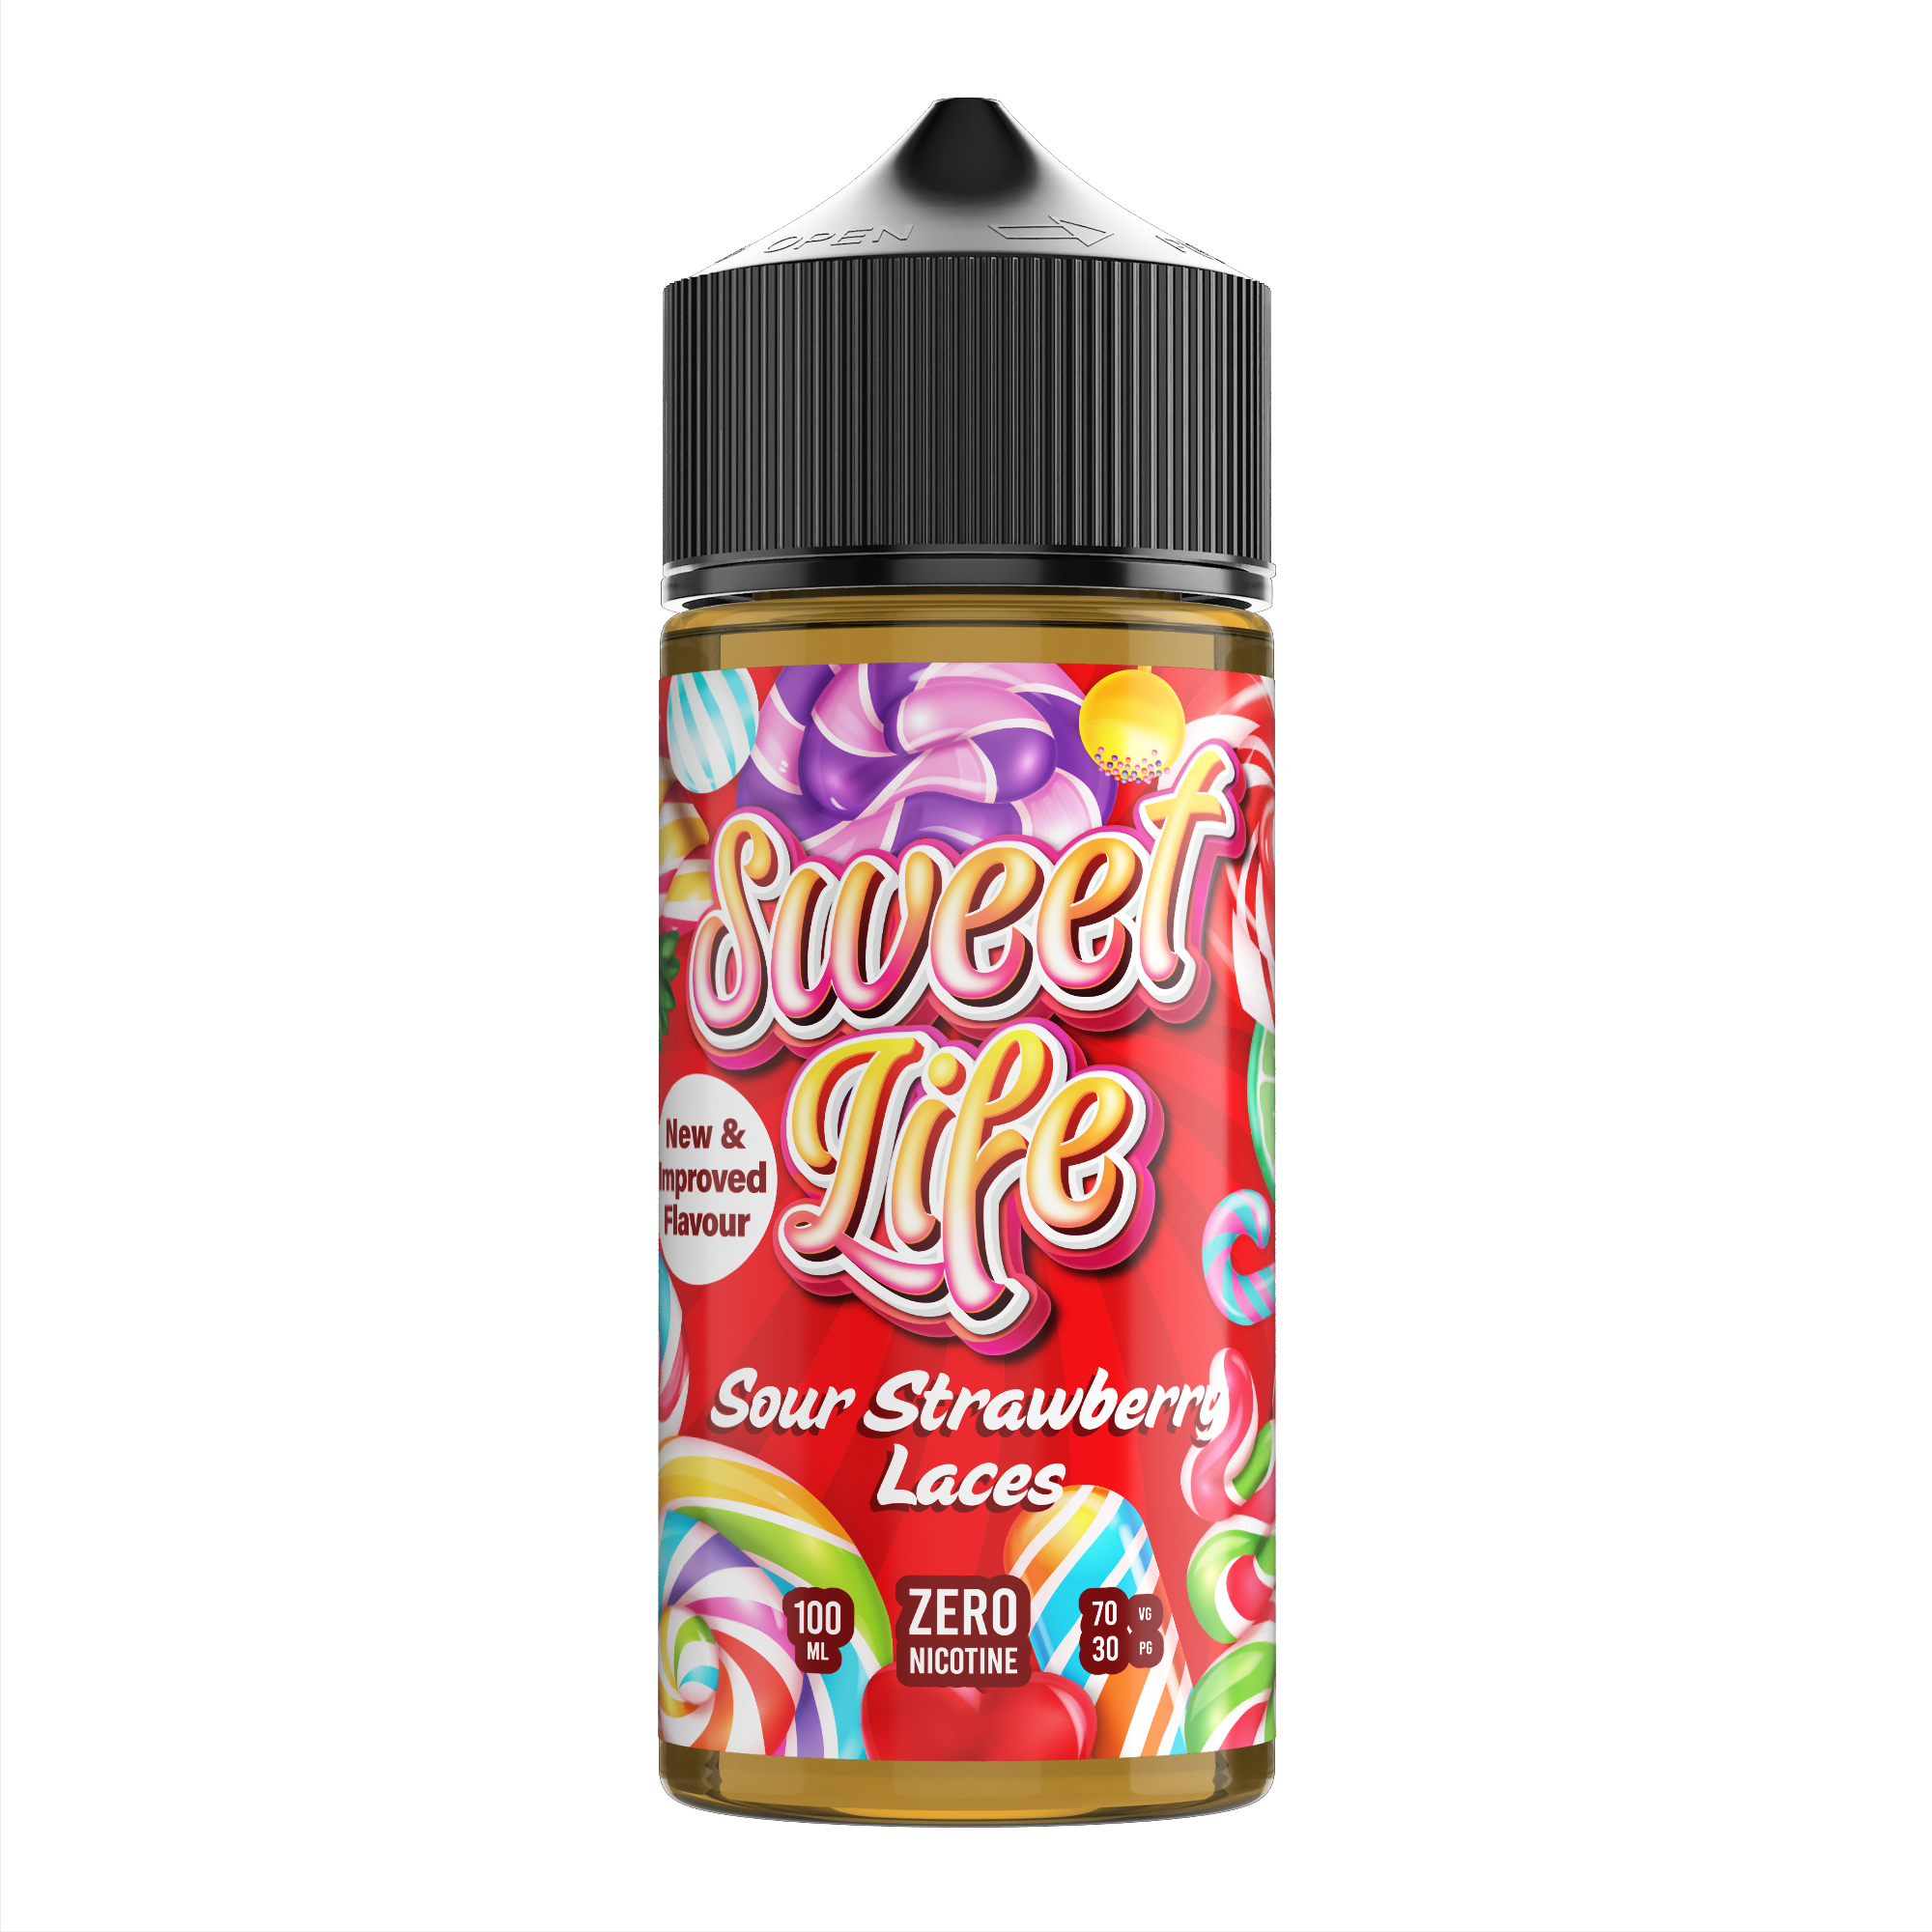 Sour Strawberry Laces 100ml Shortfill by Sweet Life